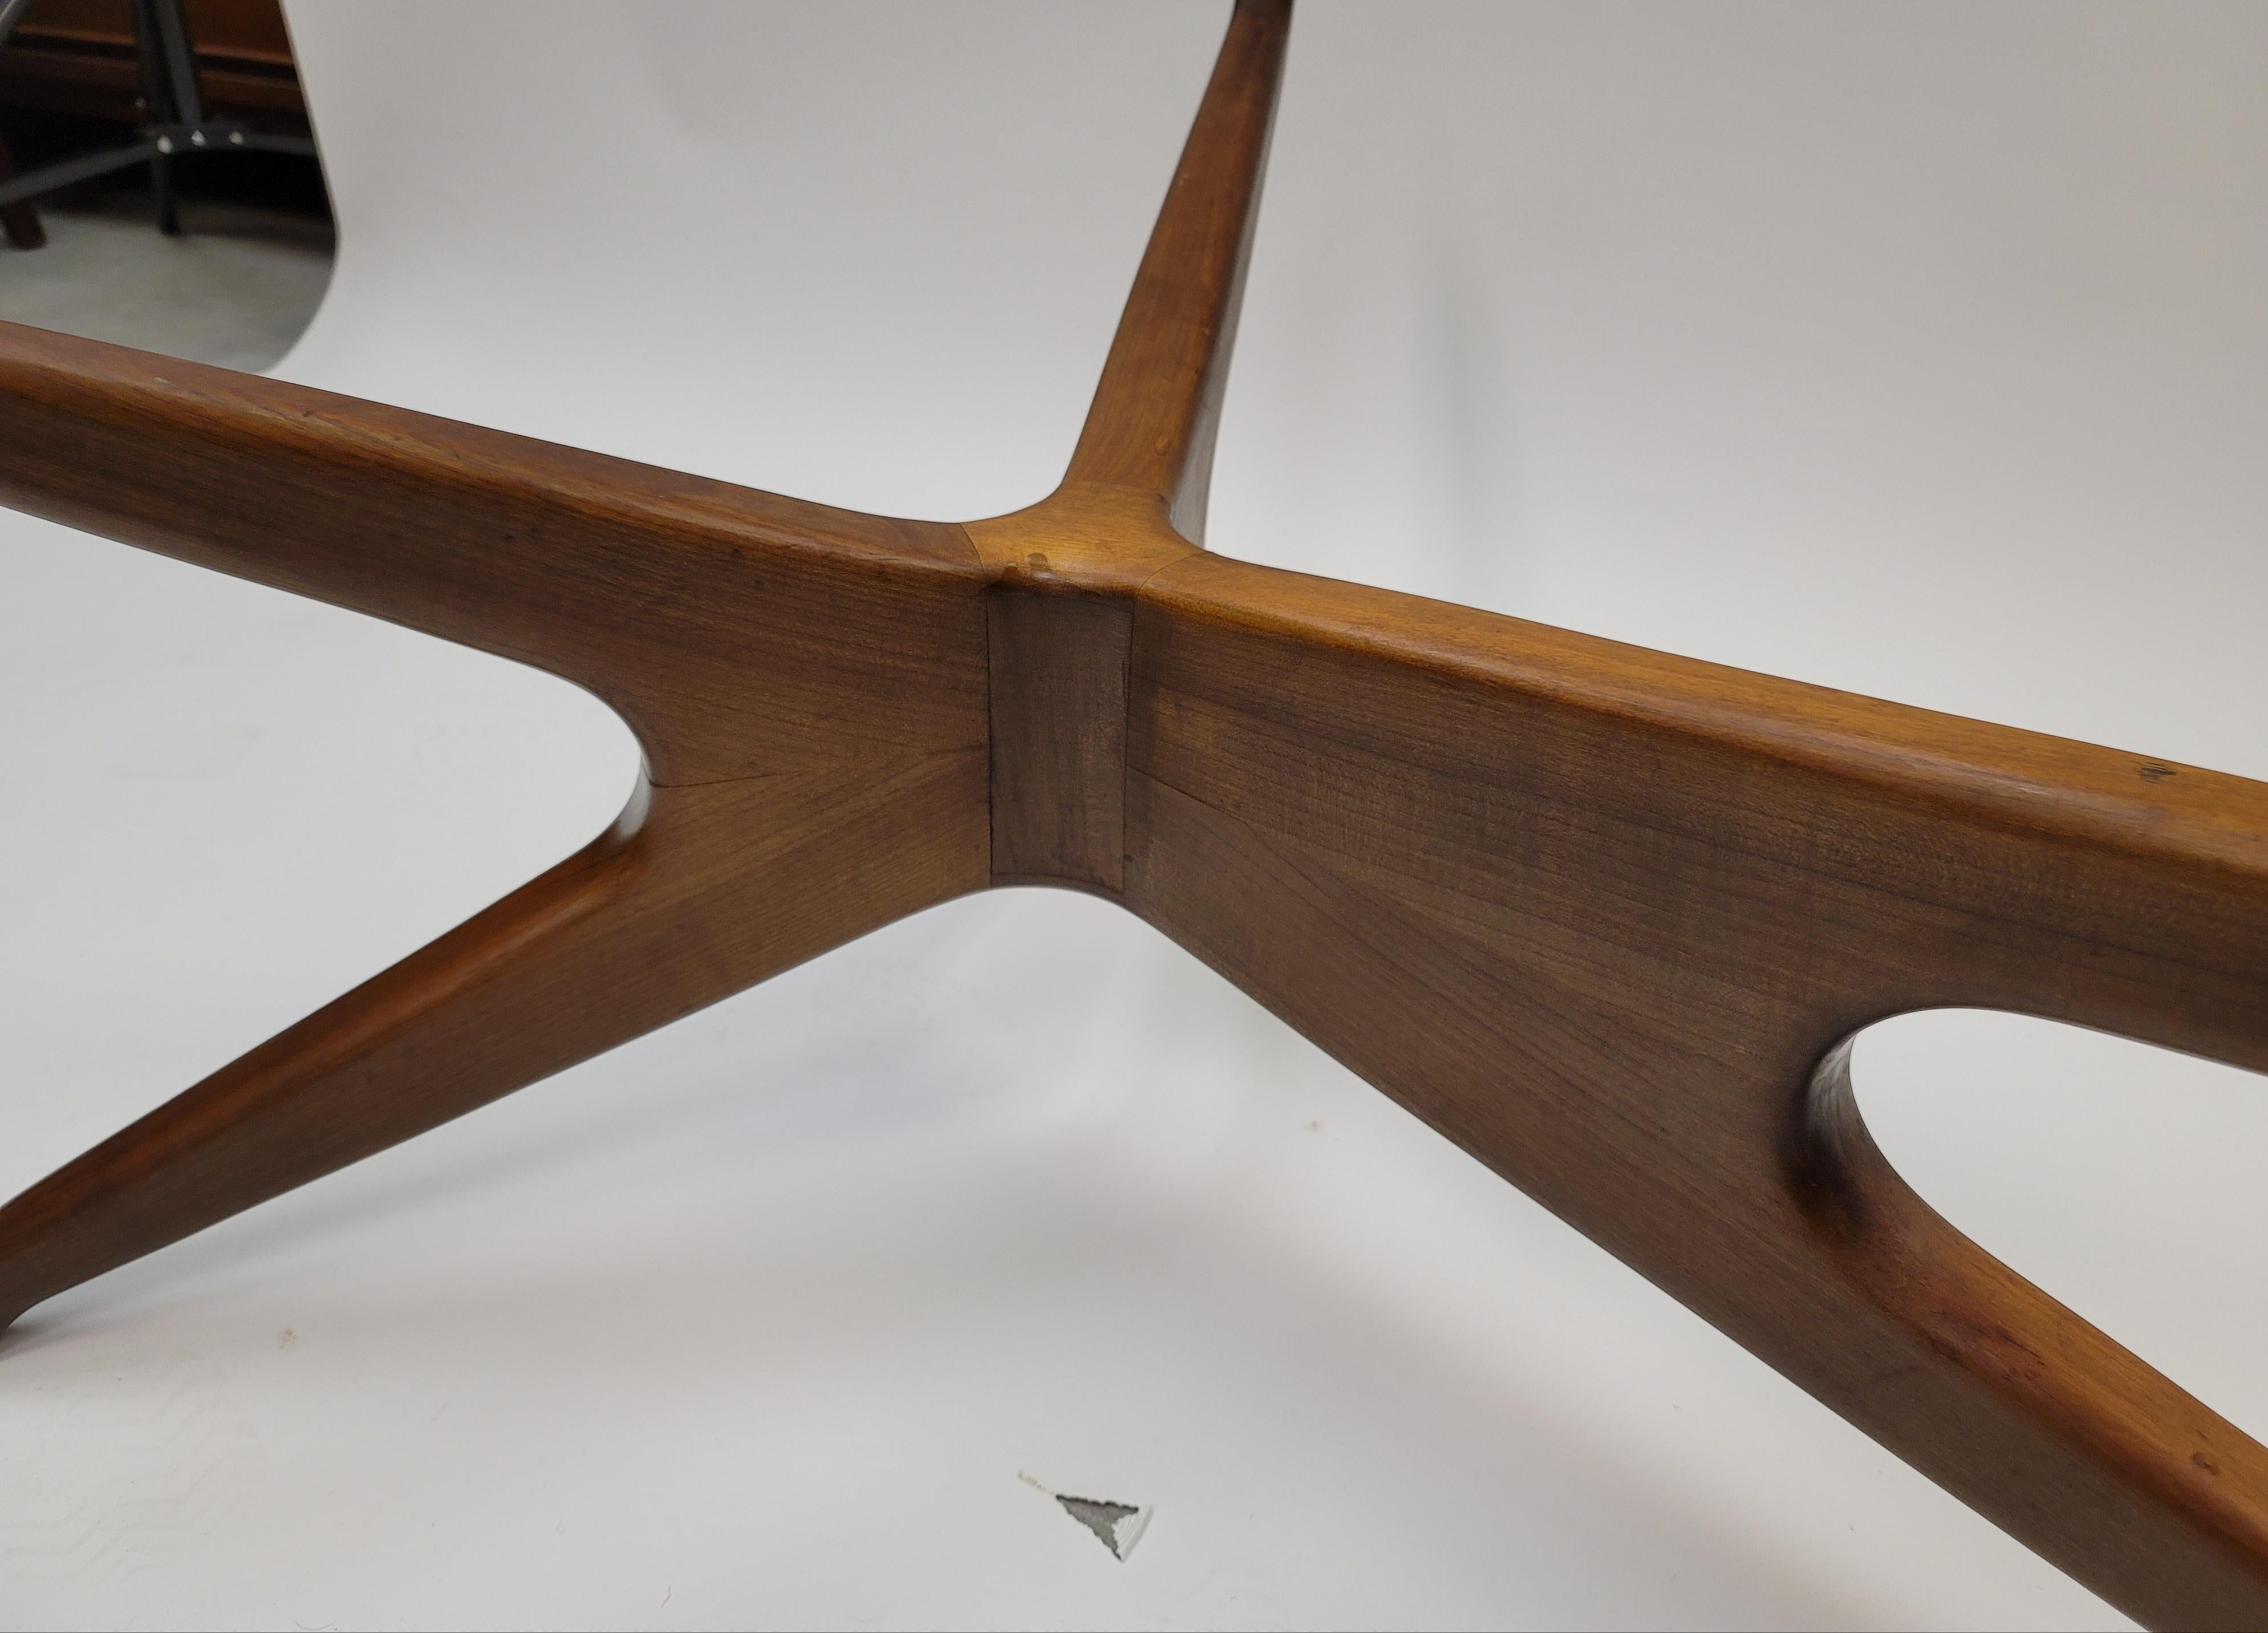 This sculptural wood coffee table with amoeba glass top is inspired by the Vladimir Kagan model 421 table. The carved walnut base support the quality 0.5